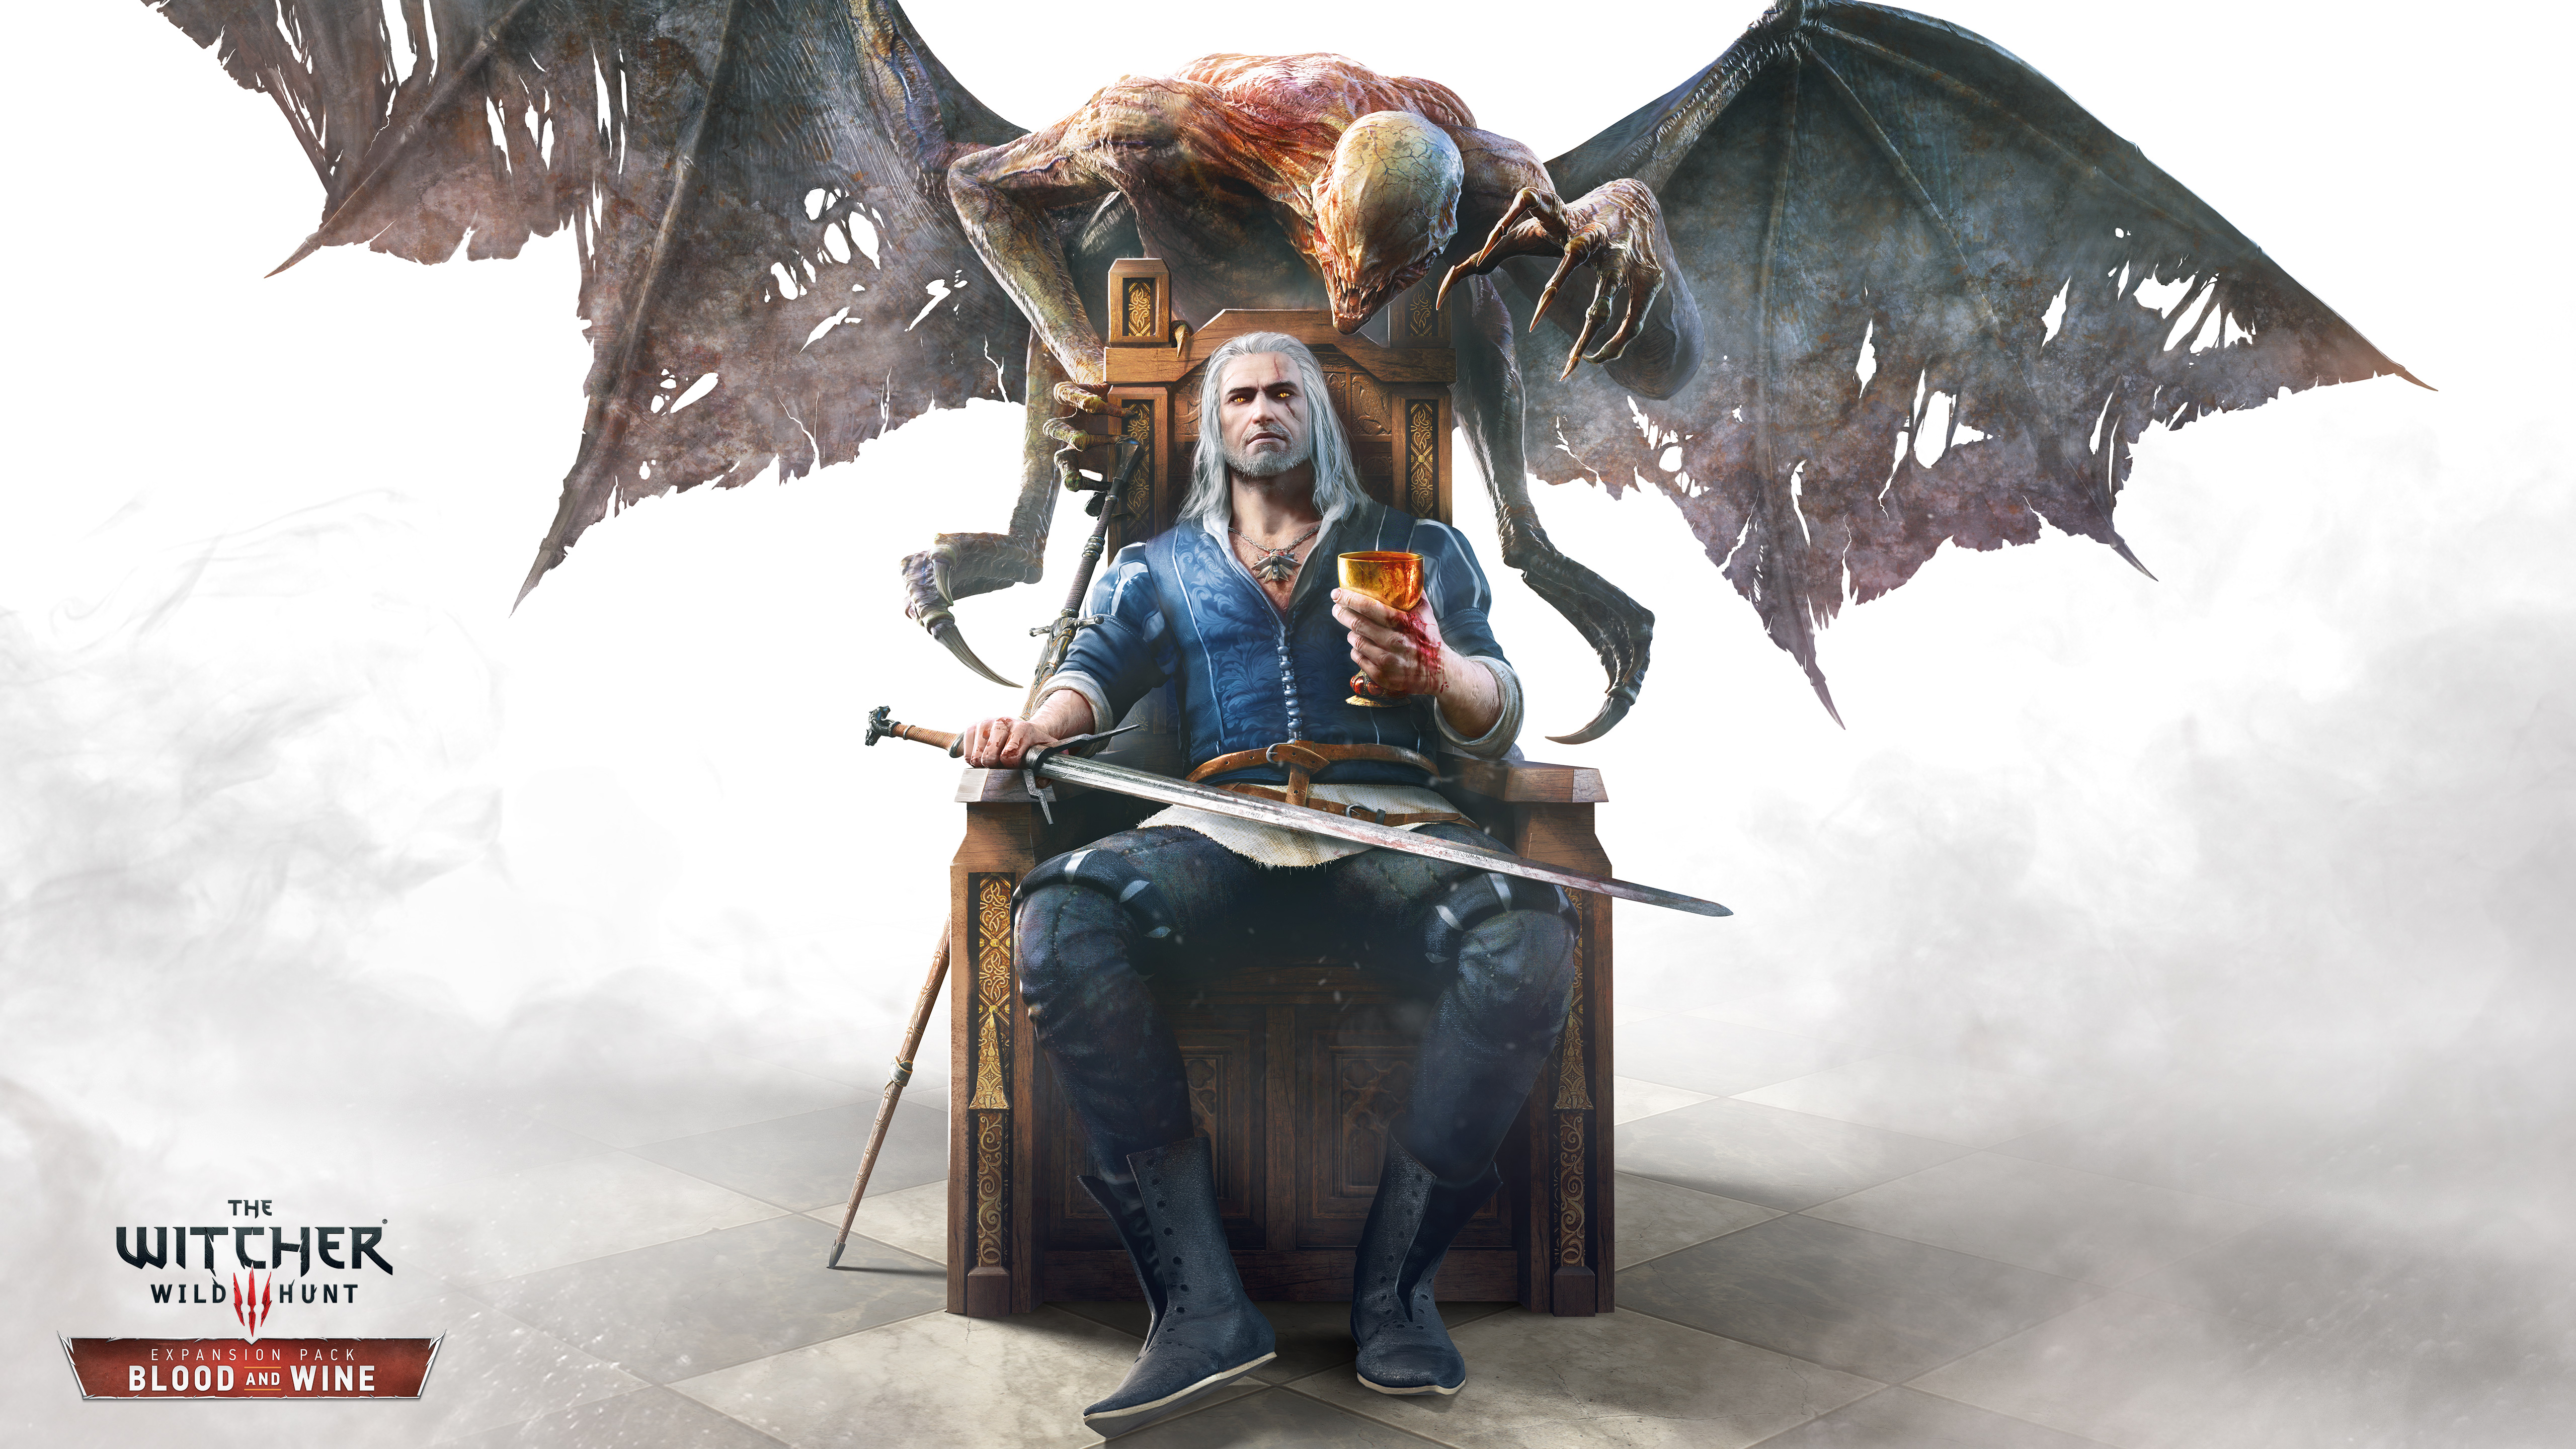 General 5120x2880 The Witcher wine video games Geralt of Rivia creature The Witcher 3: Wild Hunt sword video game characters book characters CD Projekt RED